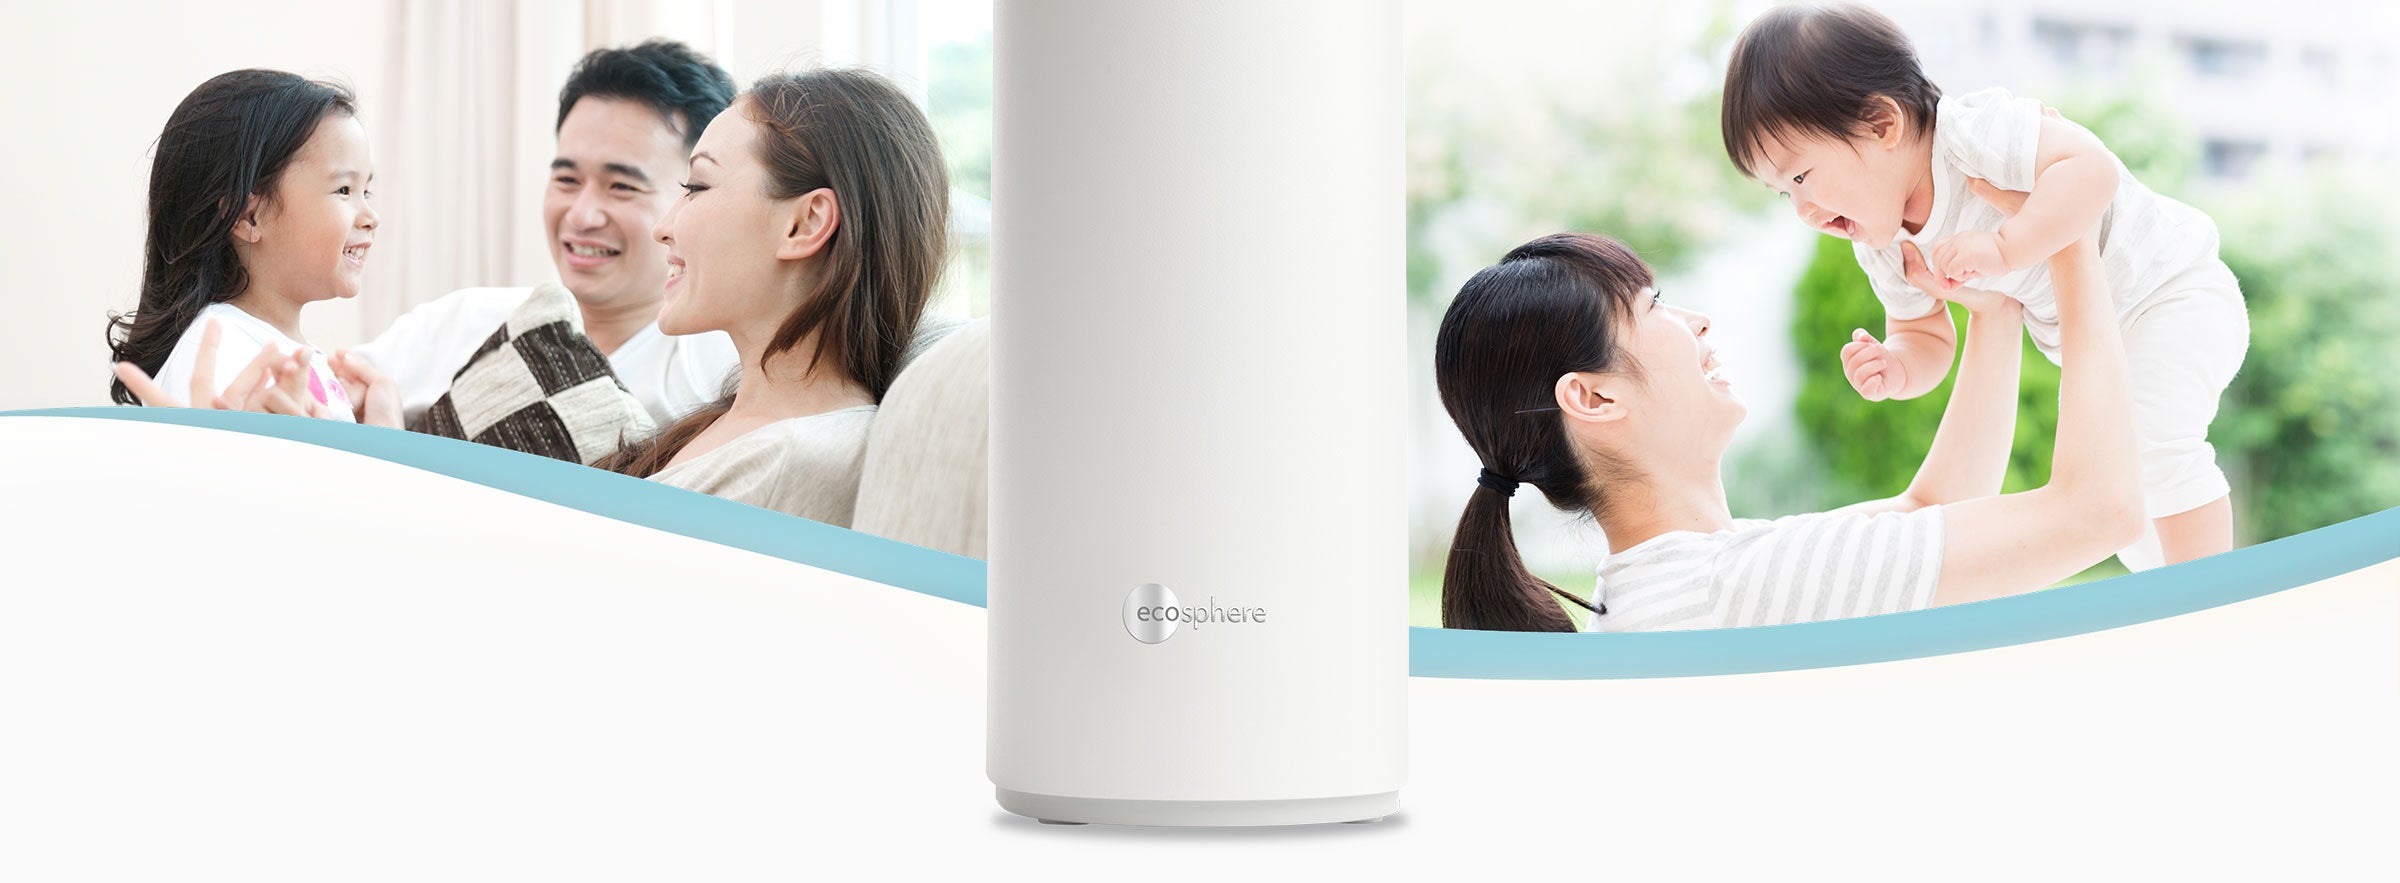 Photos of happy families in their homes with EcoSphere Water Purifier product photo in the center